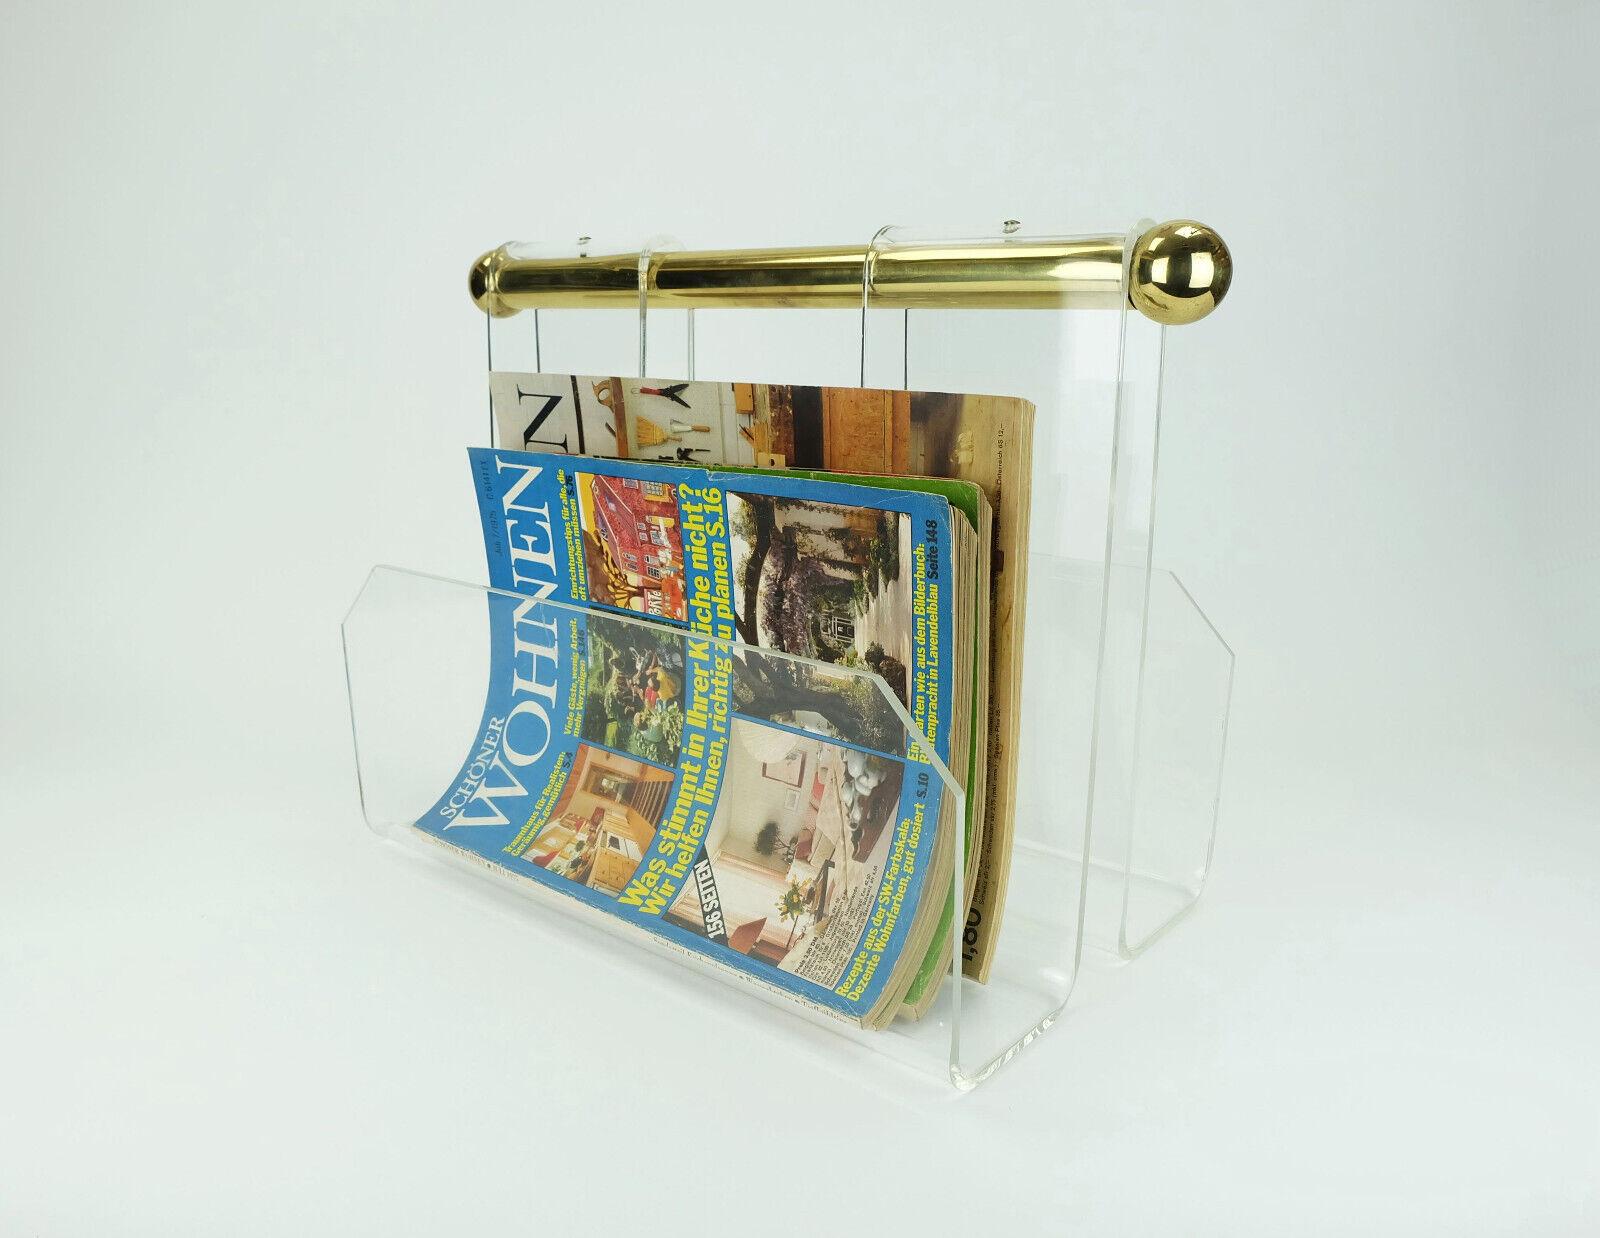 transparent lucite acrylic MAGAZINE RACK 1970s 1980s space age For Sale 5